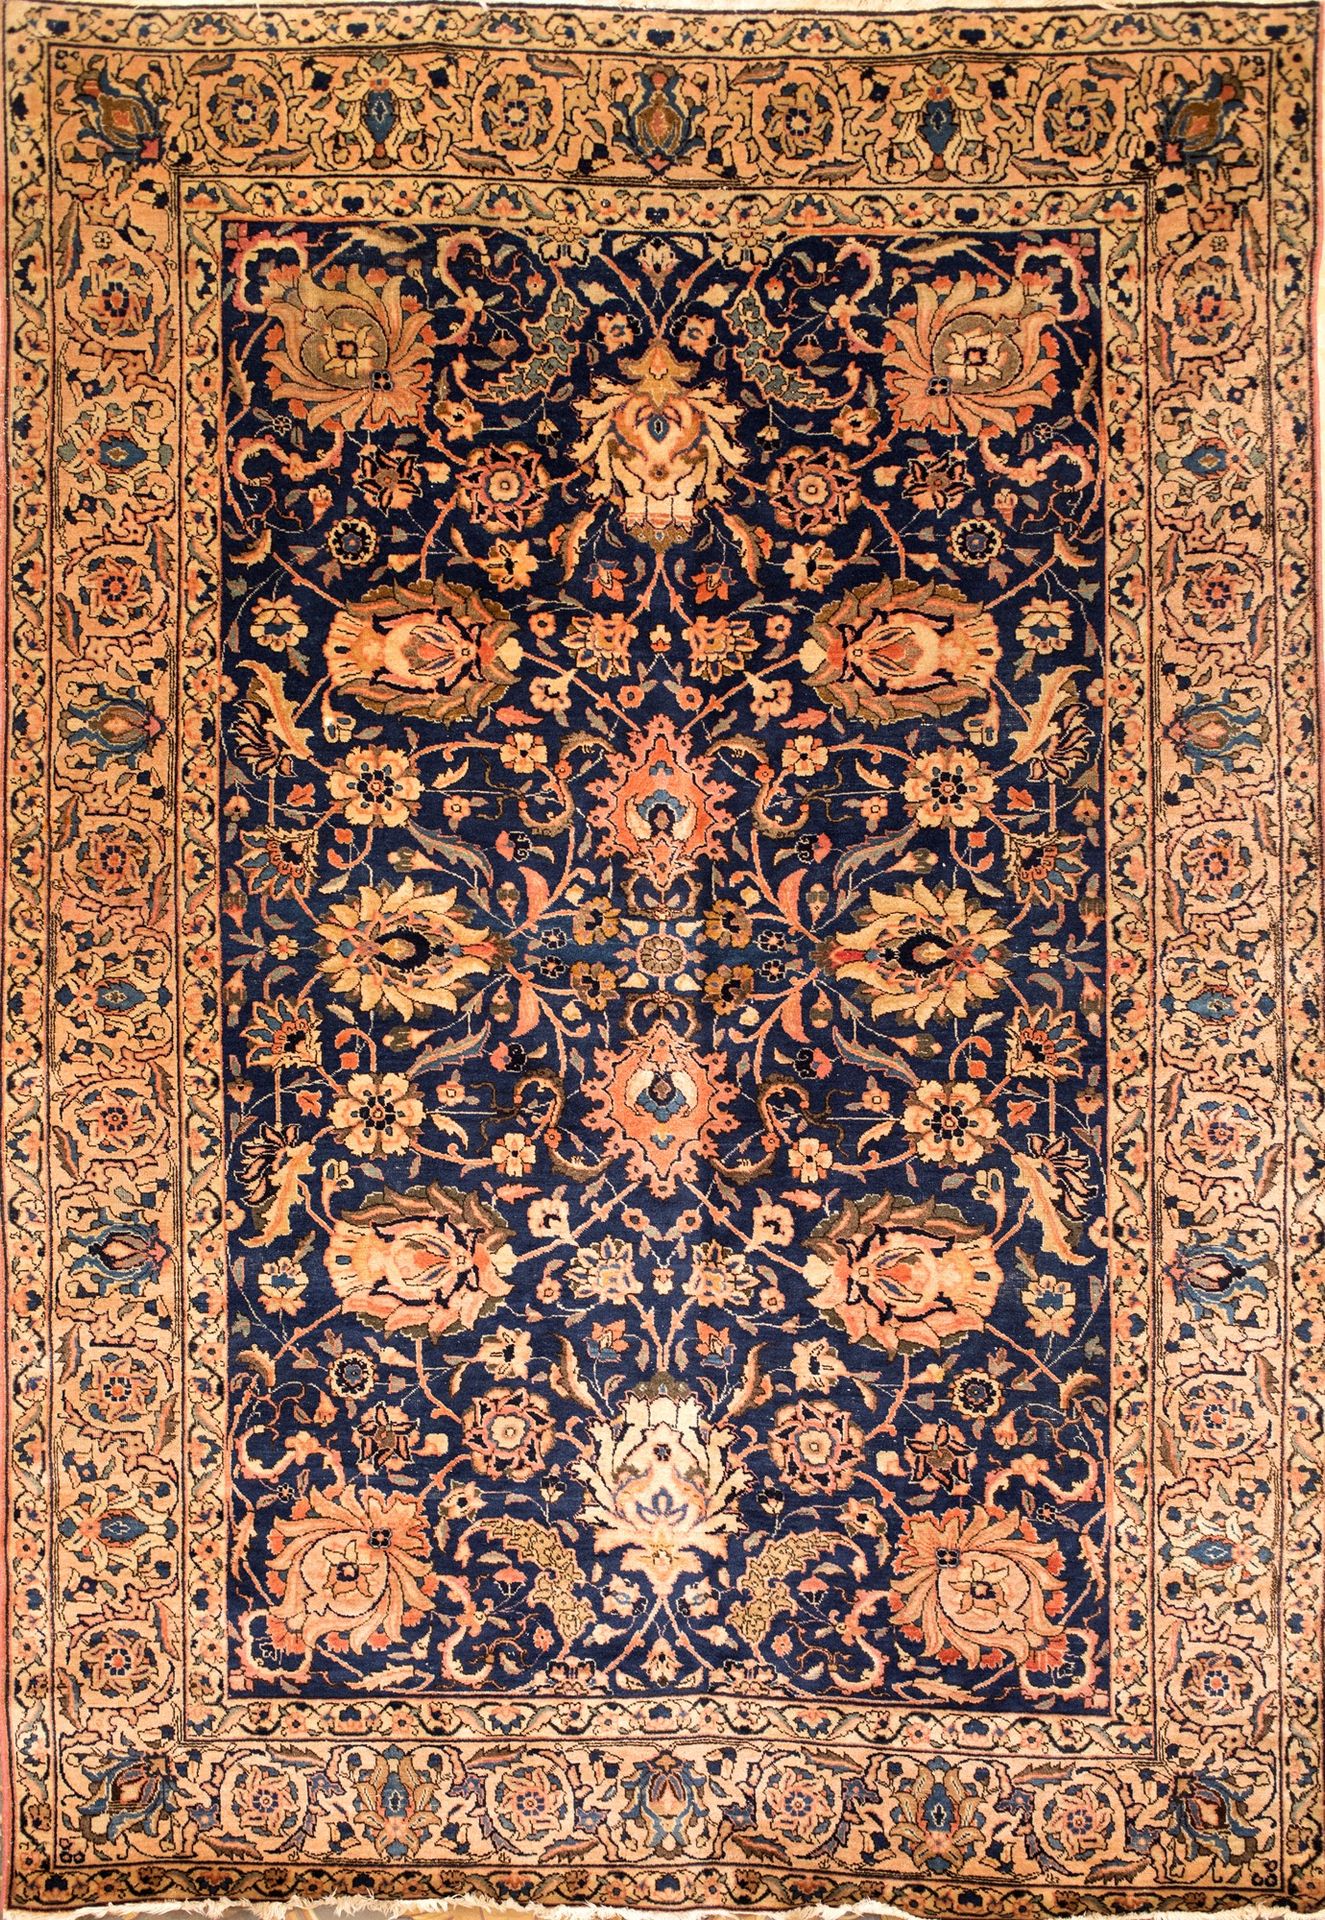 Persian carpet blue background with dense decoration with flowered shoots in sha&hellip;